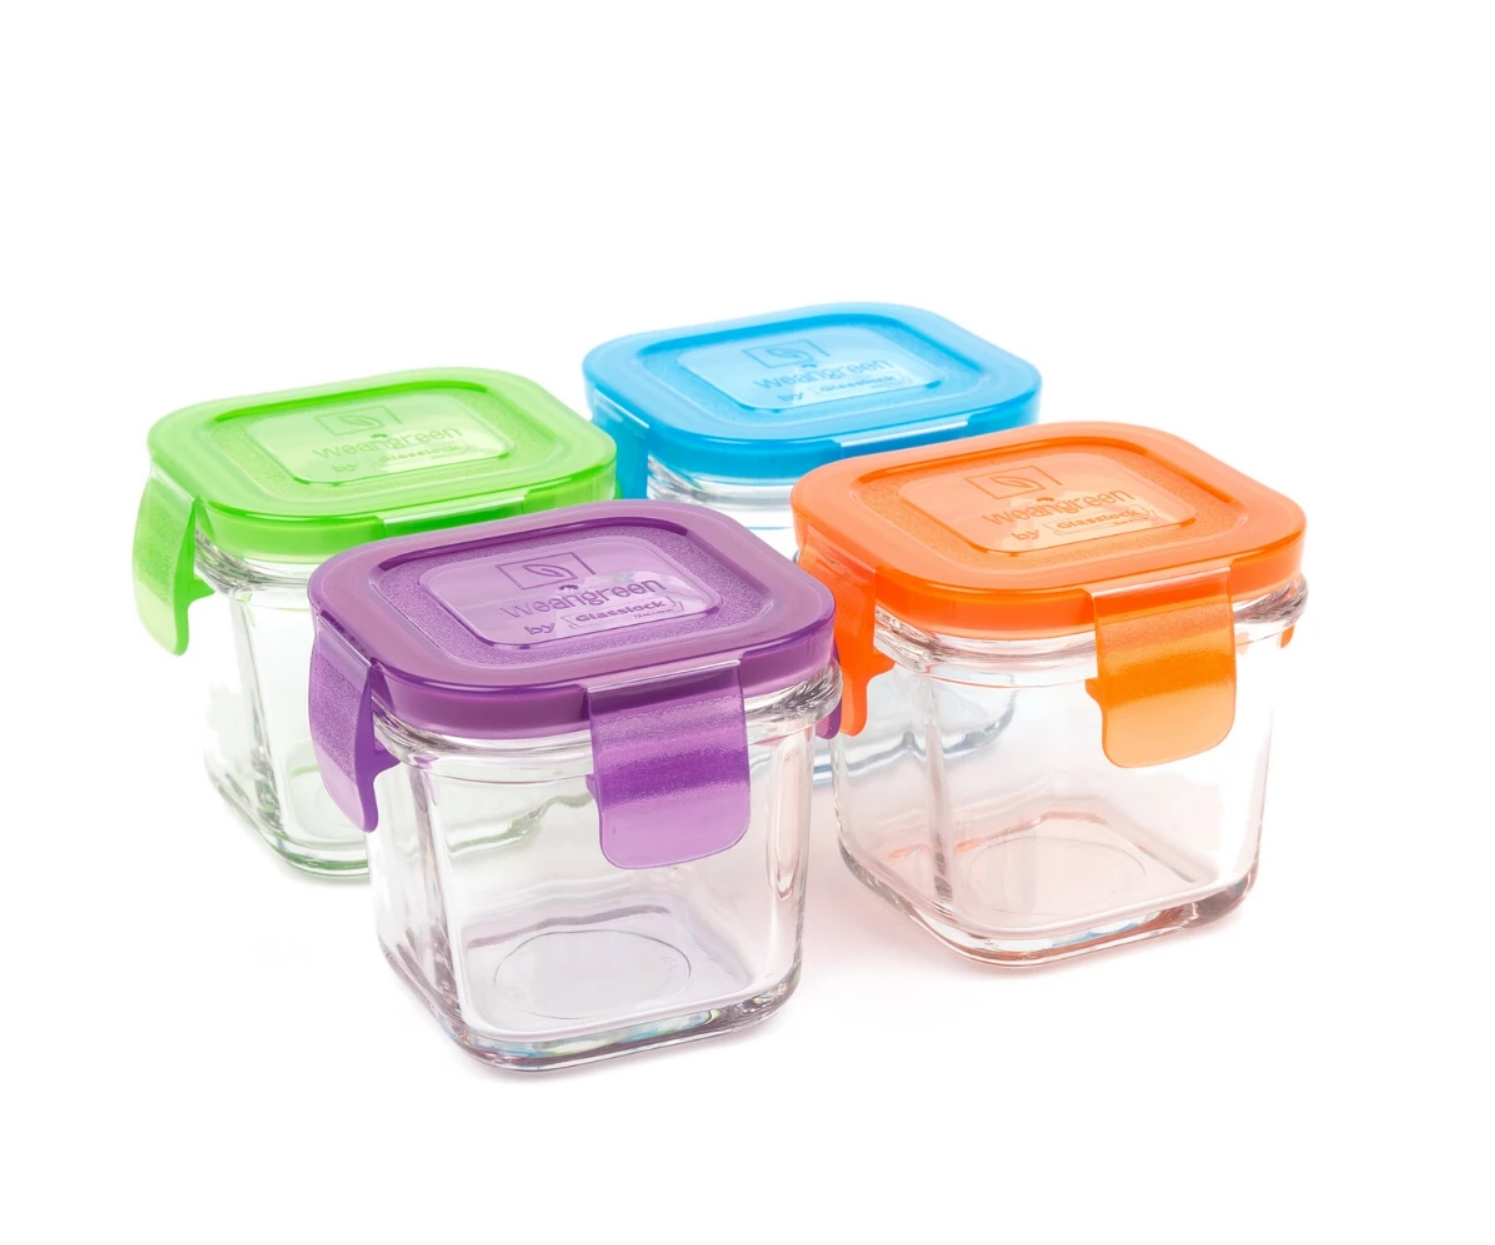 Snackcubes 3 Compartment To Go Containers